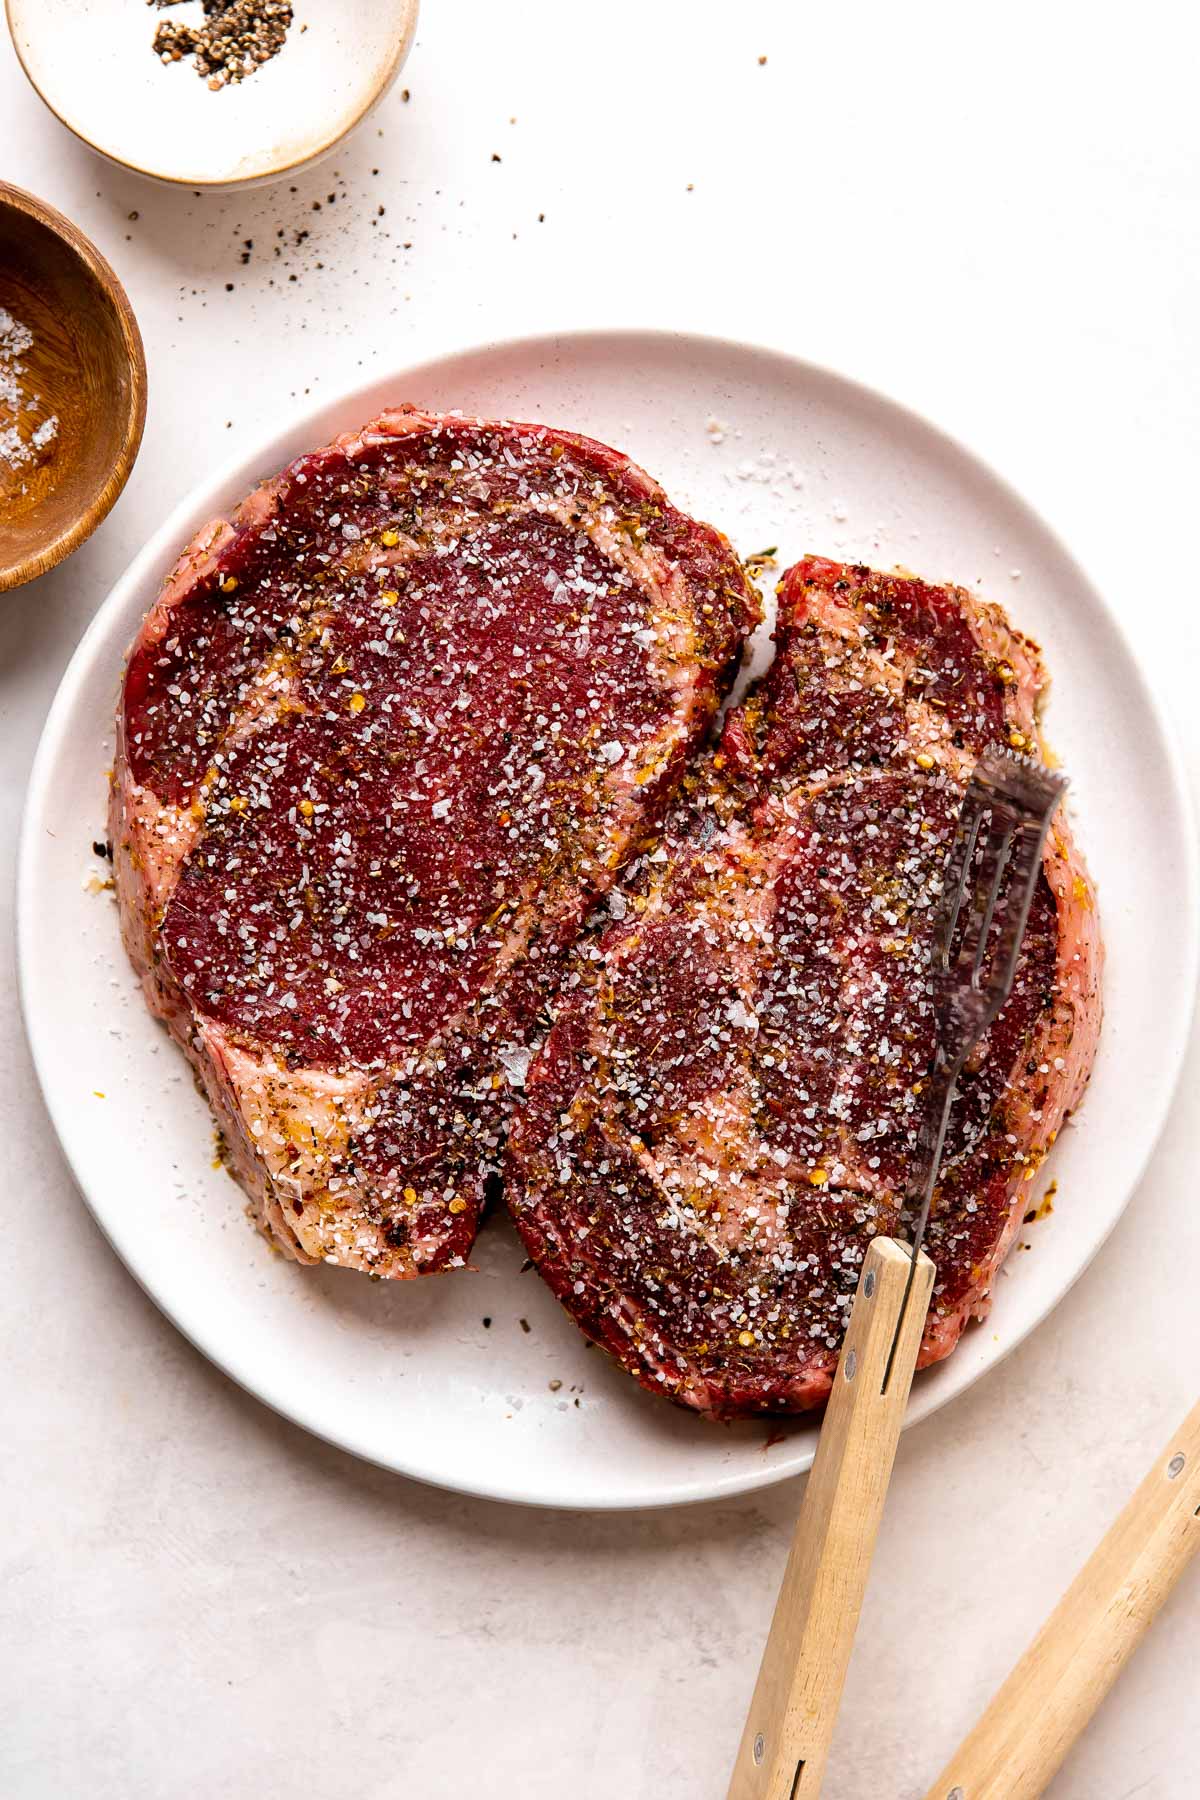 Two steaks marinated with Tuscan style marinade sit atop a white plate that sits atop a creamy white textured surface. The steaks are prepared for grilling by coming up to room temperature and are seasoned with kosher salt and ground black pepper. Two small pinch bowls filled with kosher salt and ground black pepper rest alongside the plate, while a pair of grill tongs rests partially on the steaks.